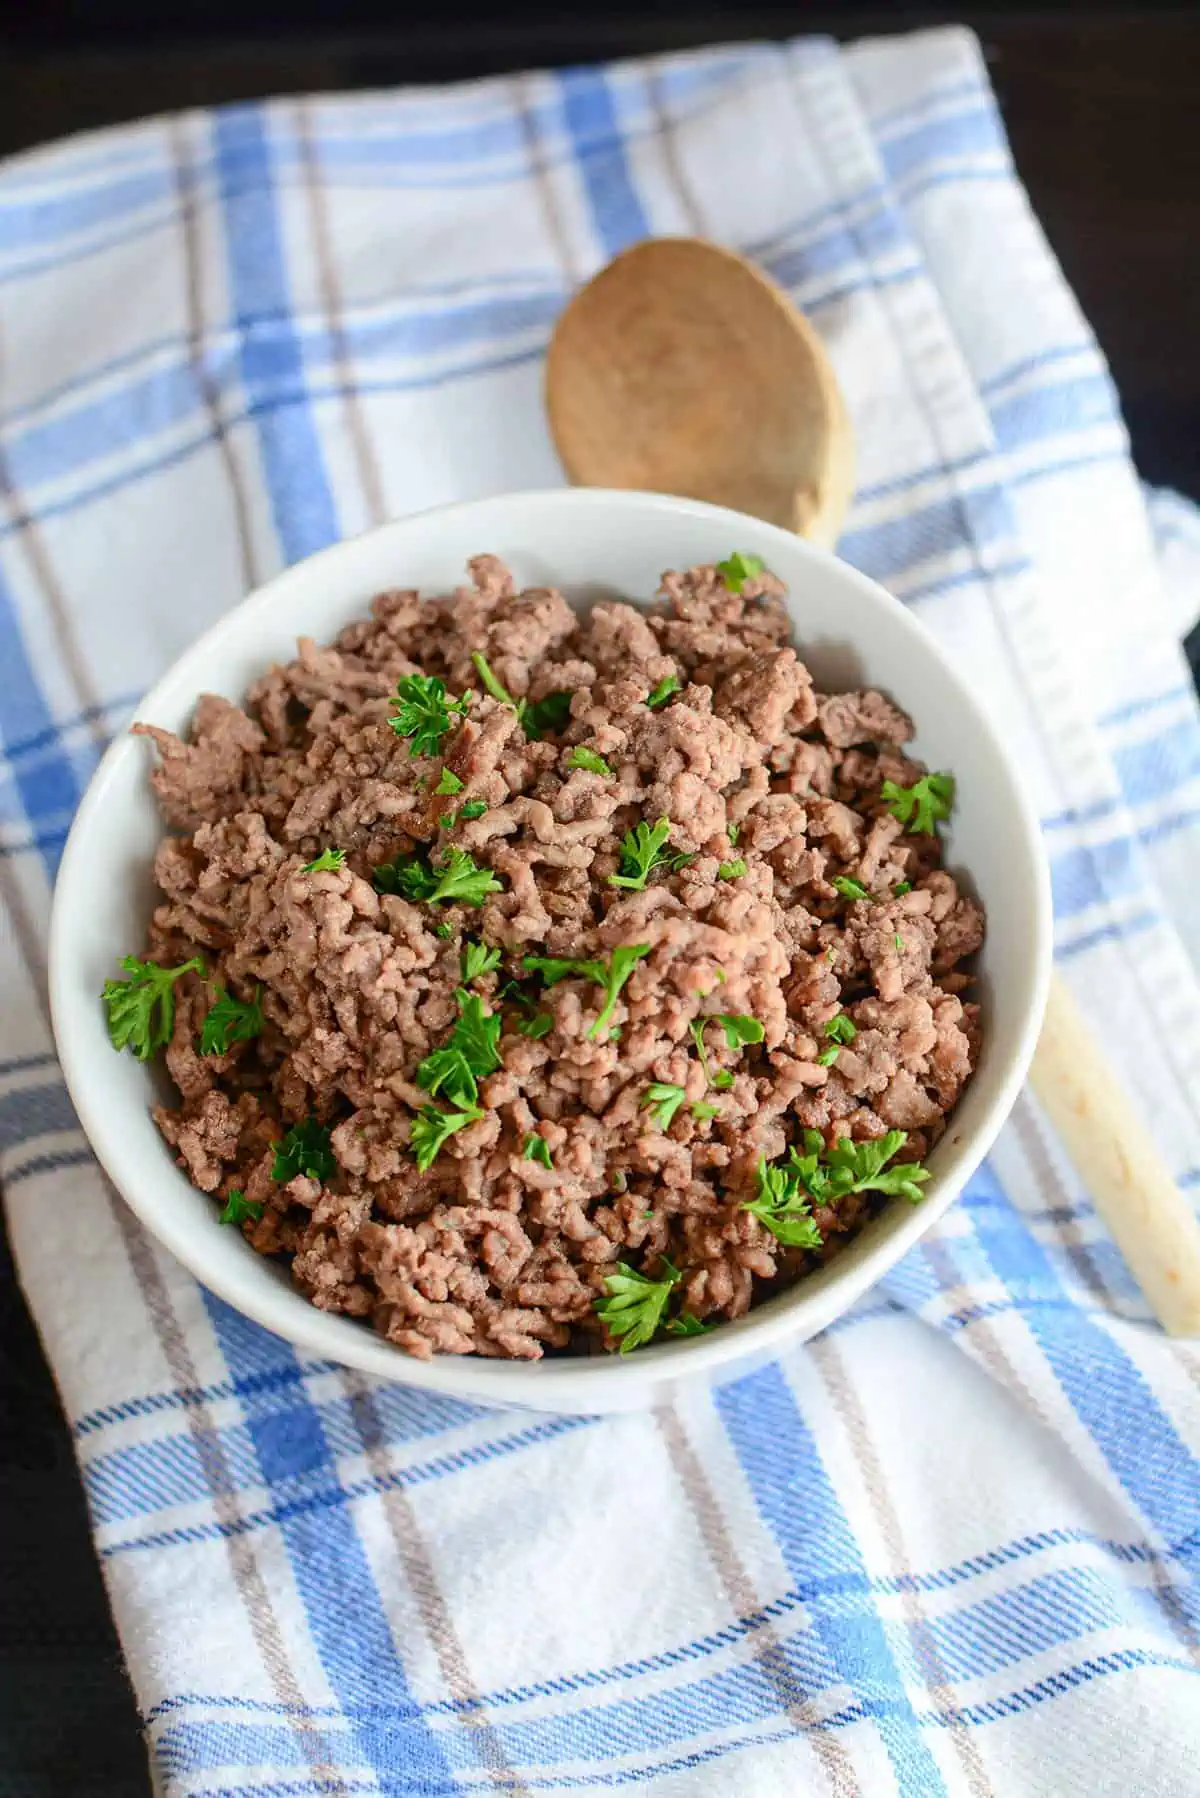 Cooked ground beef in a white bowl with a wooden spoon next to it.